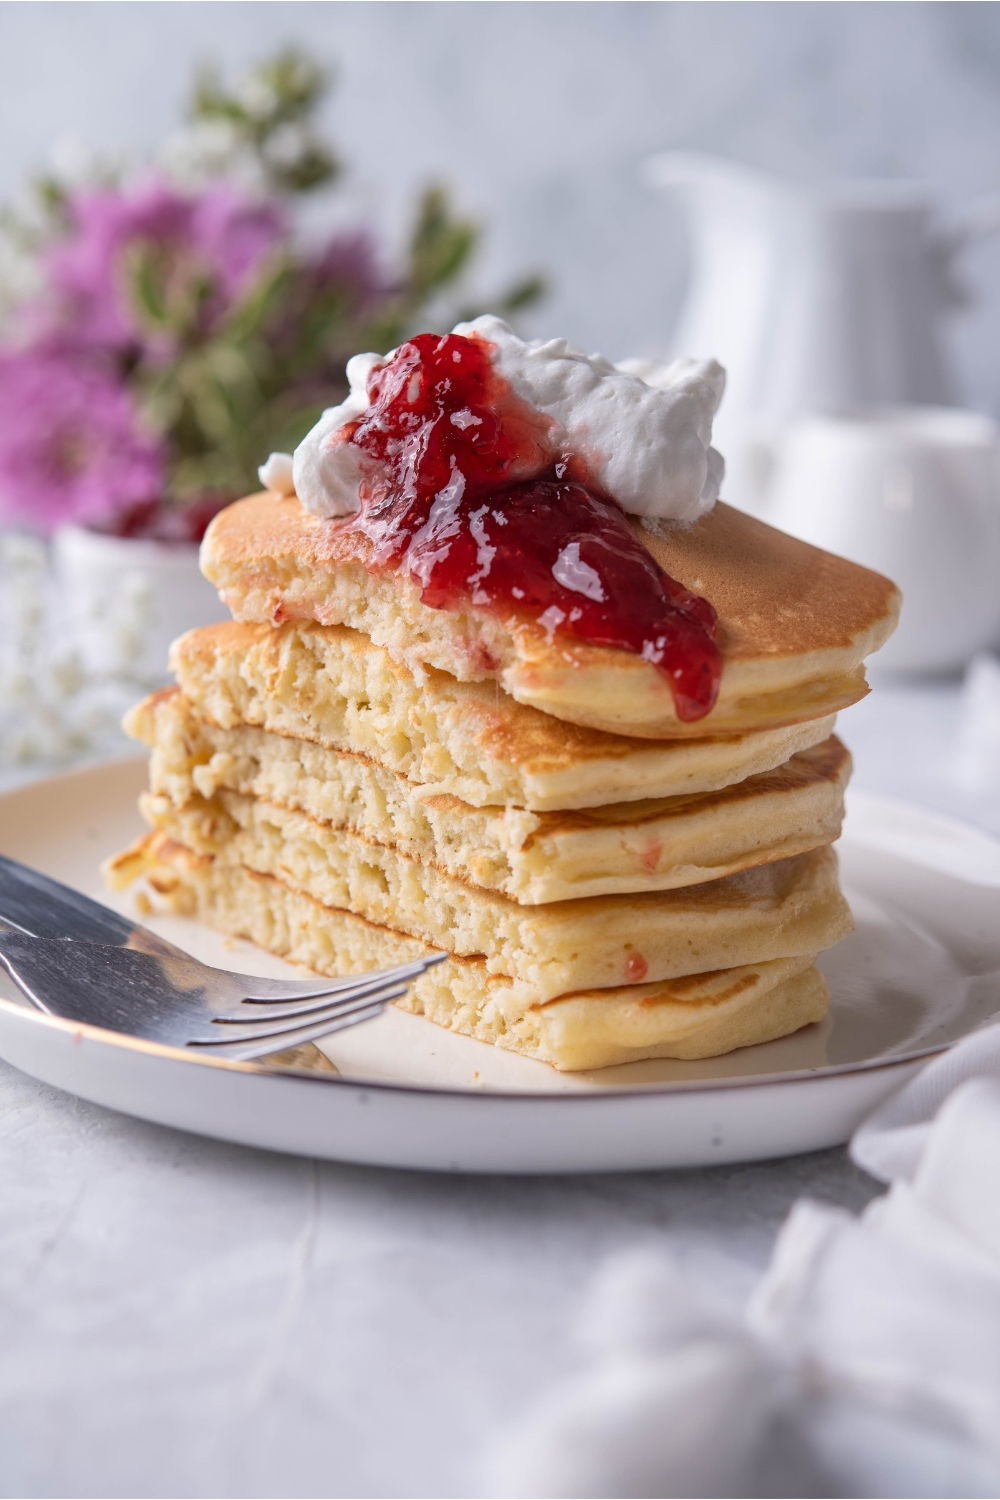 A stack of 5 flapjacks on a plate topped with strawberry jam and a dollop of whipped cream. The stack is sliced almost in half to show the fluffy interior of the flapjacks.